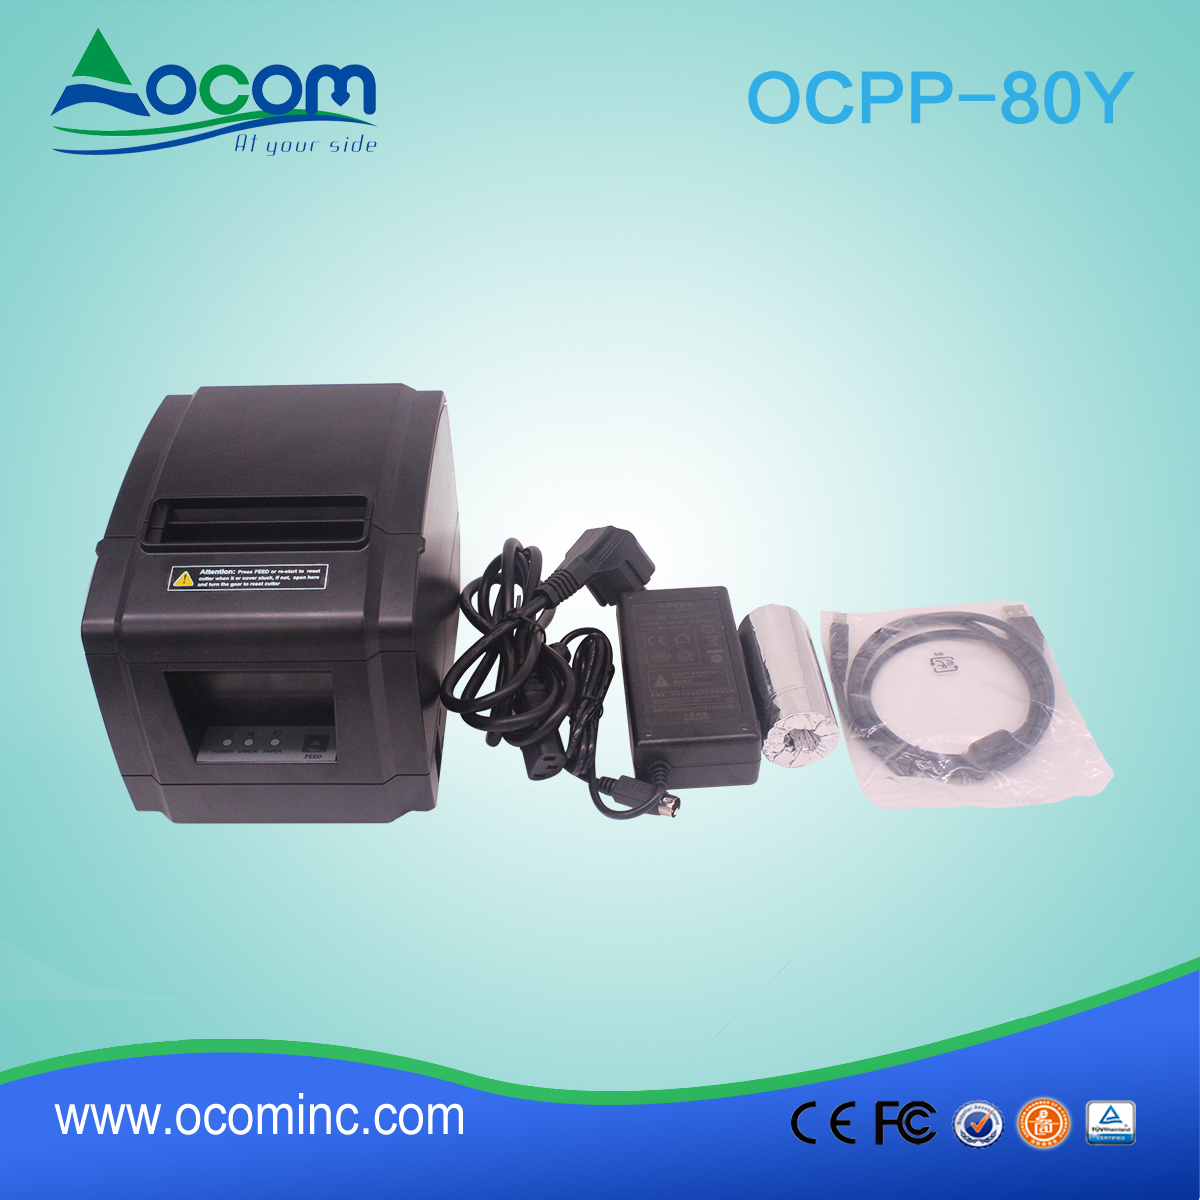 OCPP-80Y-China made low lost 80mm thermal printer